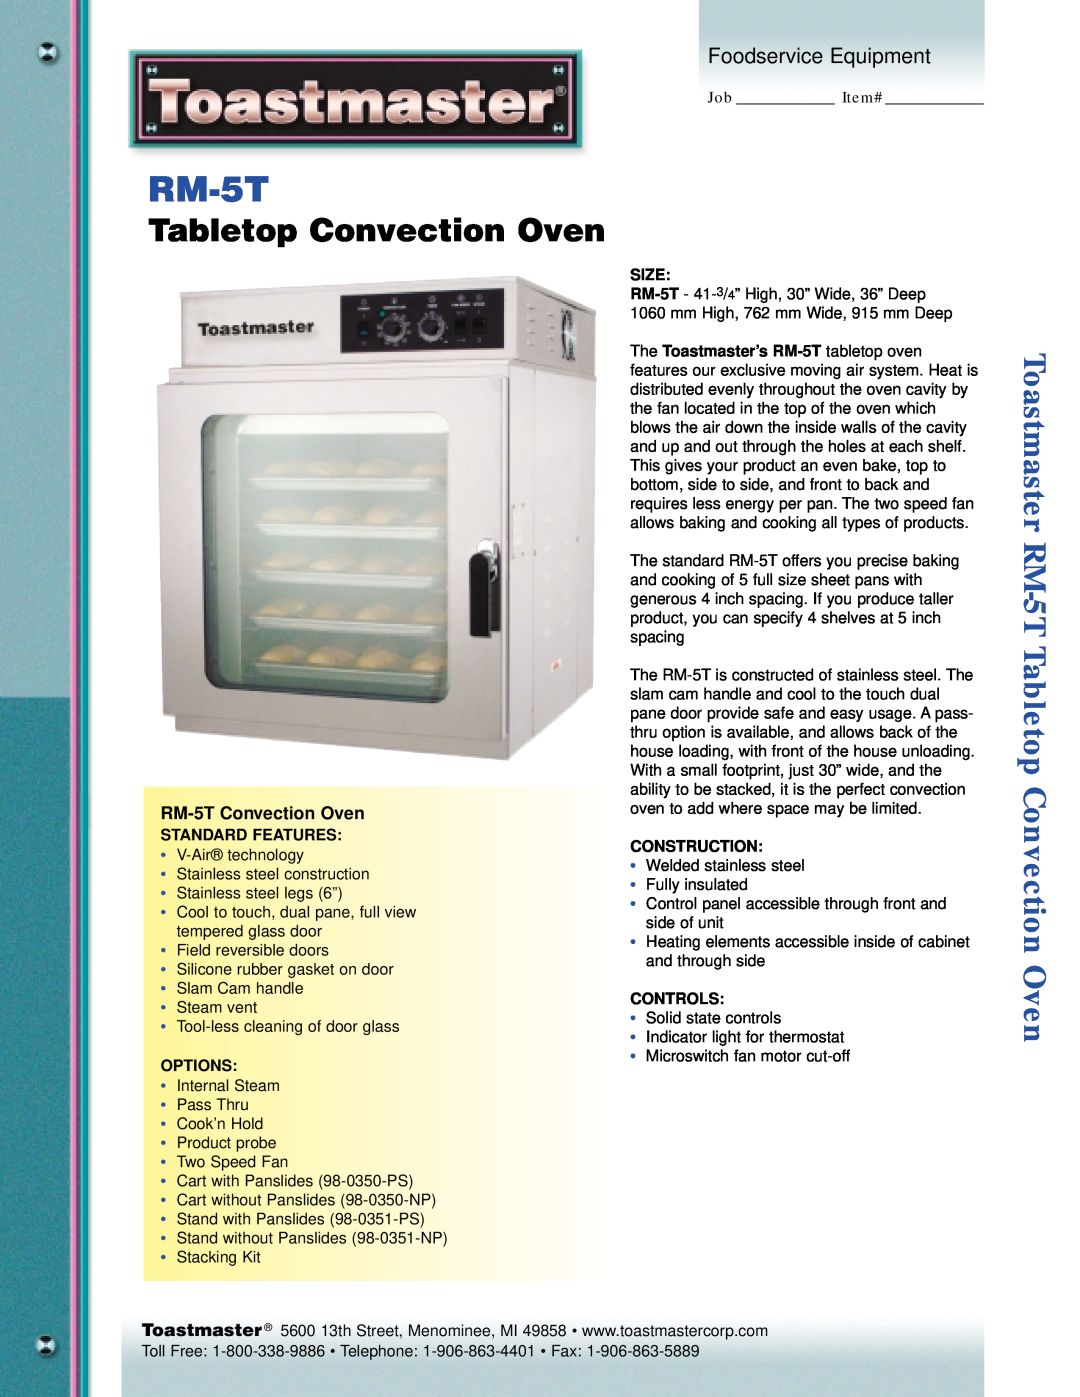 Toastmaster manual RM-5TConvection Oven, Toastmaster RM-5TTabletop Convection Oven, Foodservice Equipment 